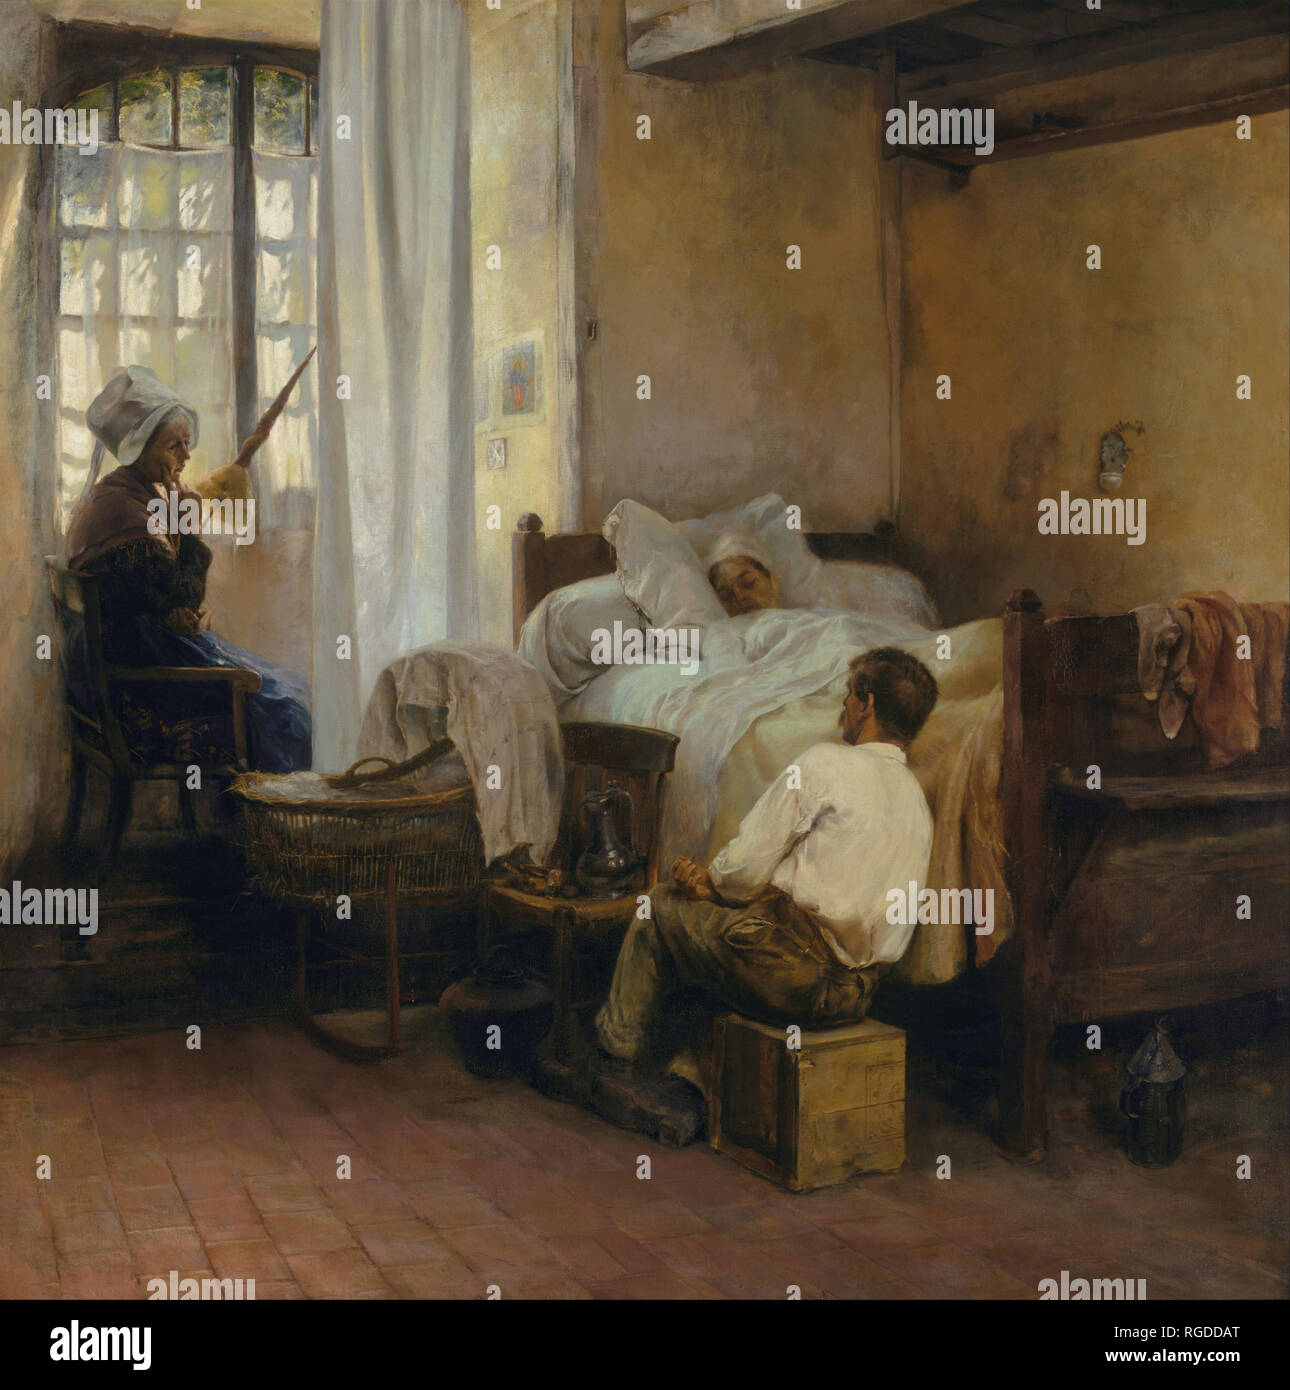 The first born. Date/Period: 1883. Painting. Oil on canvas. Height: 1,675 mm (65.94 in); Width: 1,675 mm (65.94 in). Author: GASTON LA TOUCHE. Stock Photo